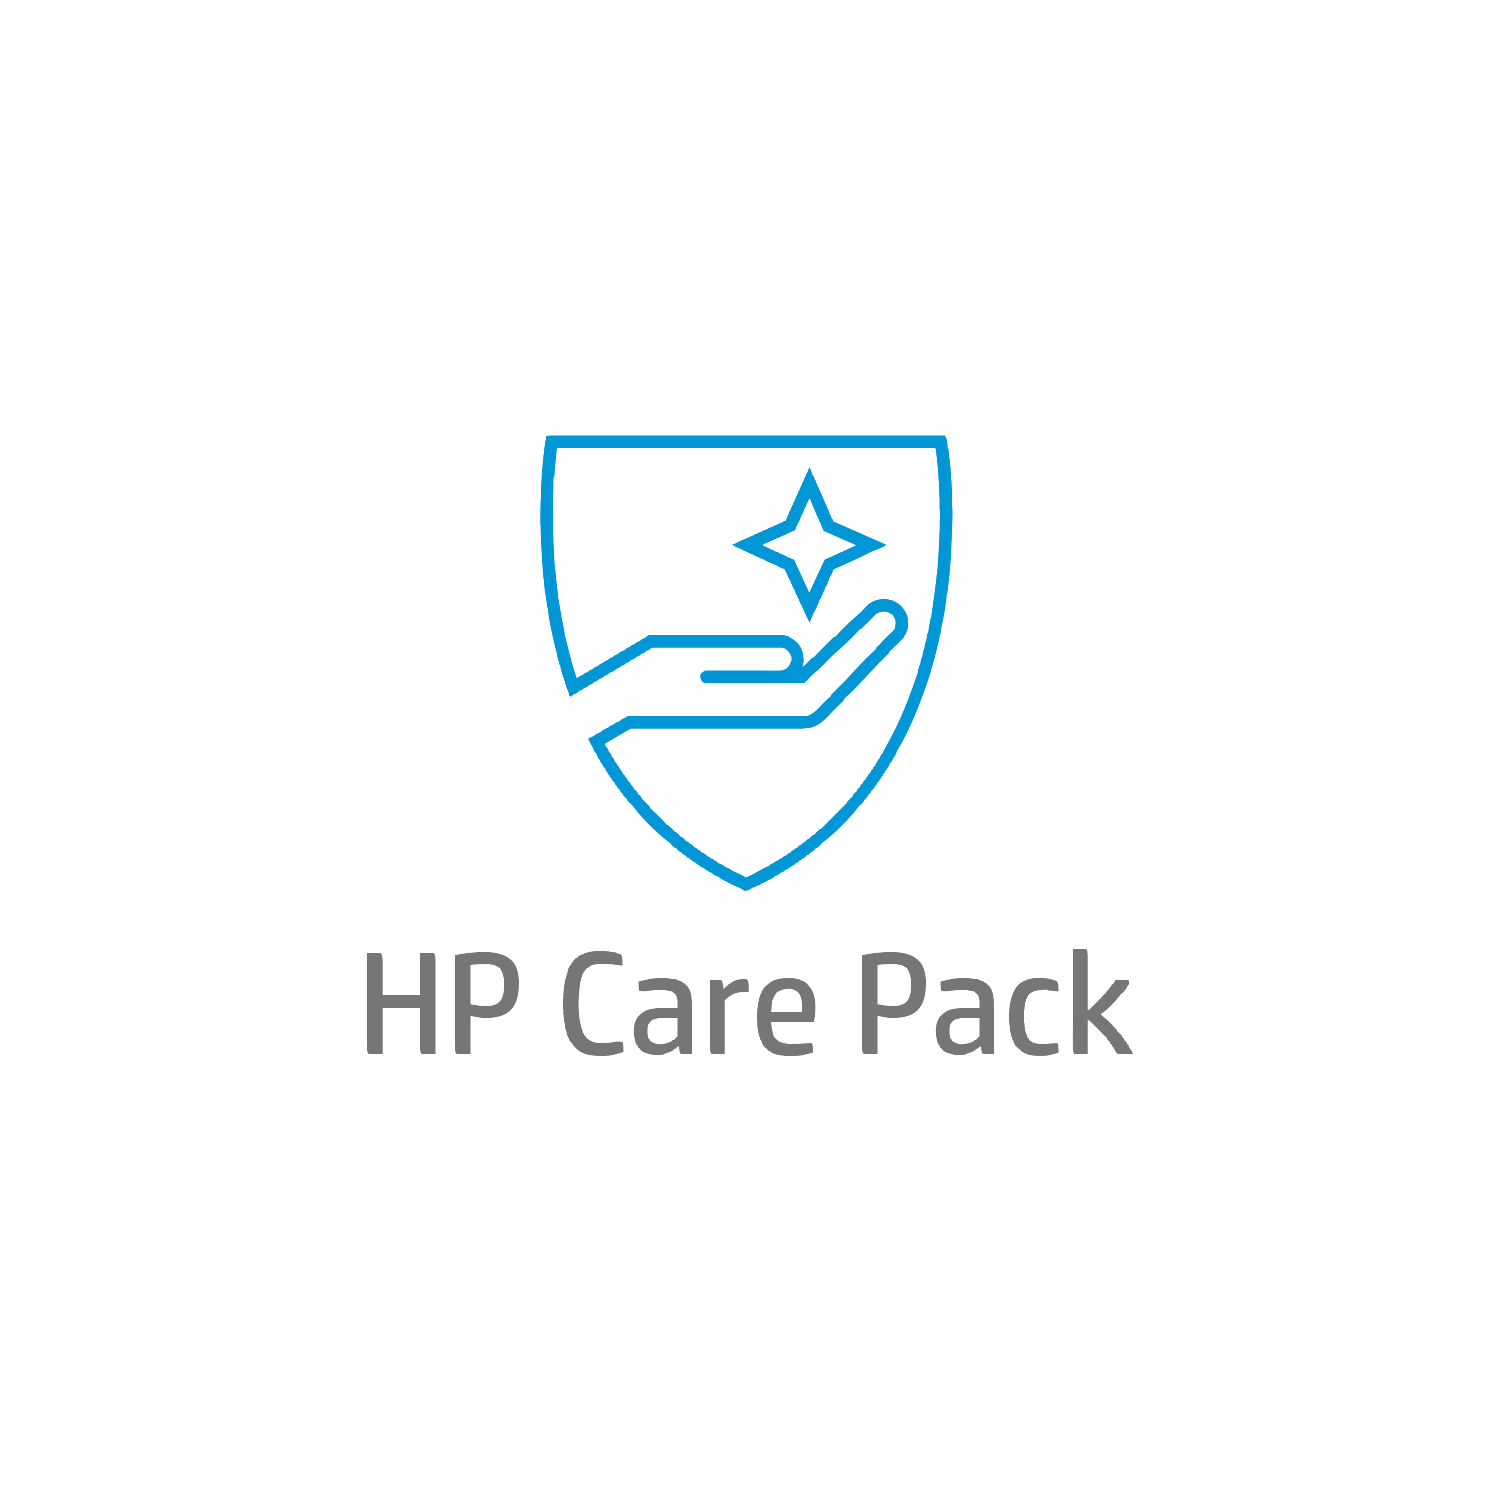 Bild von HP 3 year Care Pack w/Standard Exchange for LaserJet Printers - Exchange - Offsite - In warranty - Standard workdays - 9 hours - 3 years - Exchange shipped within 4-7 business days